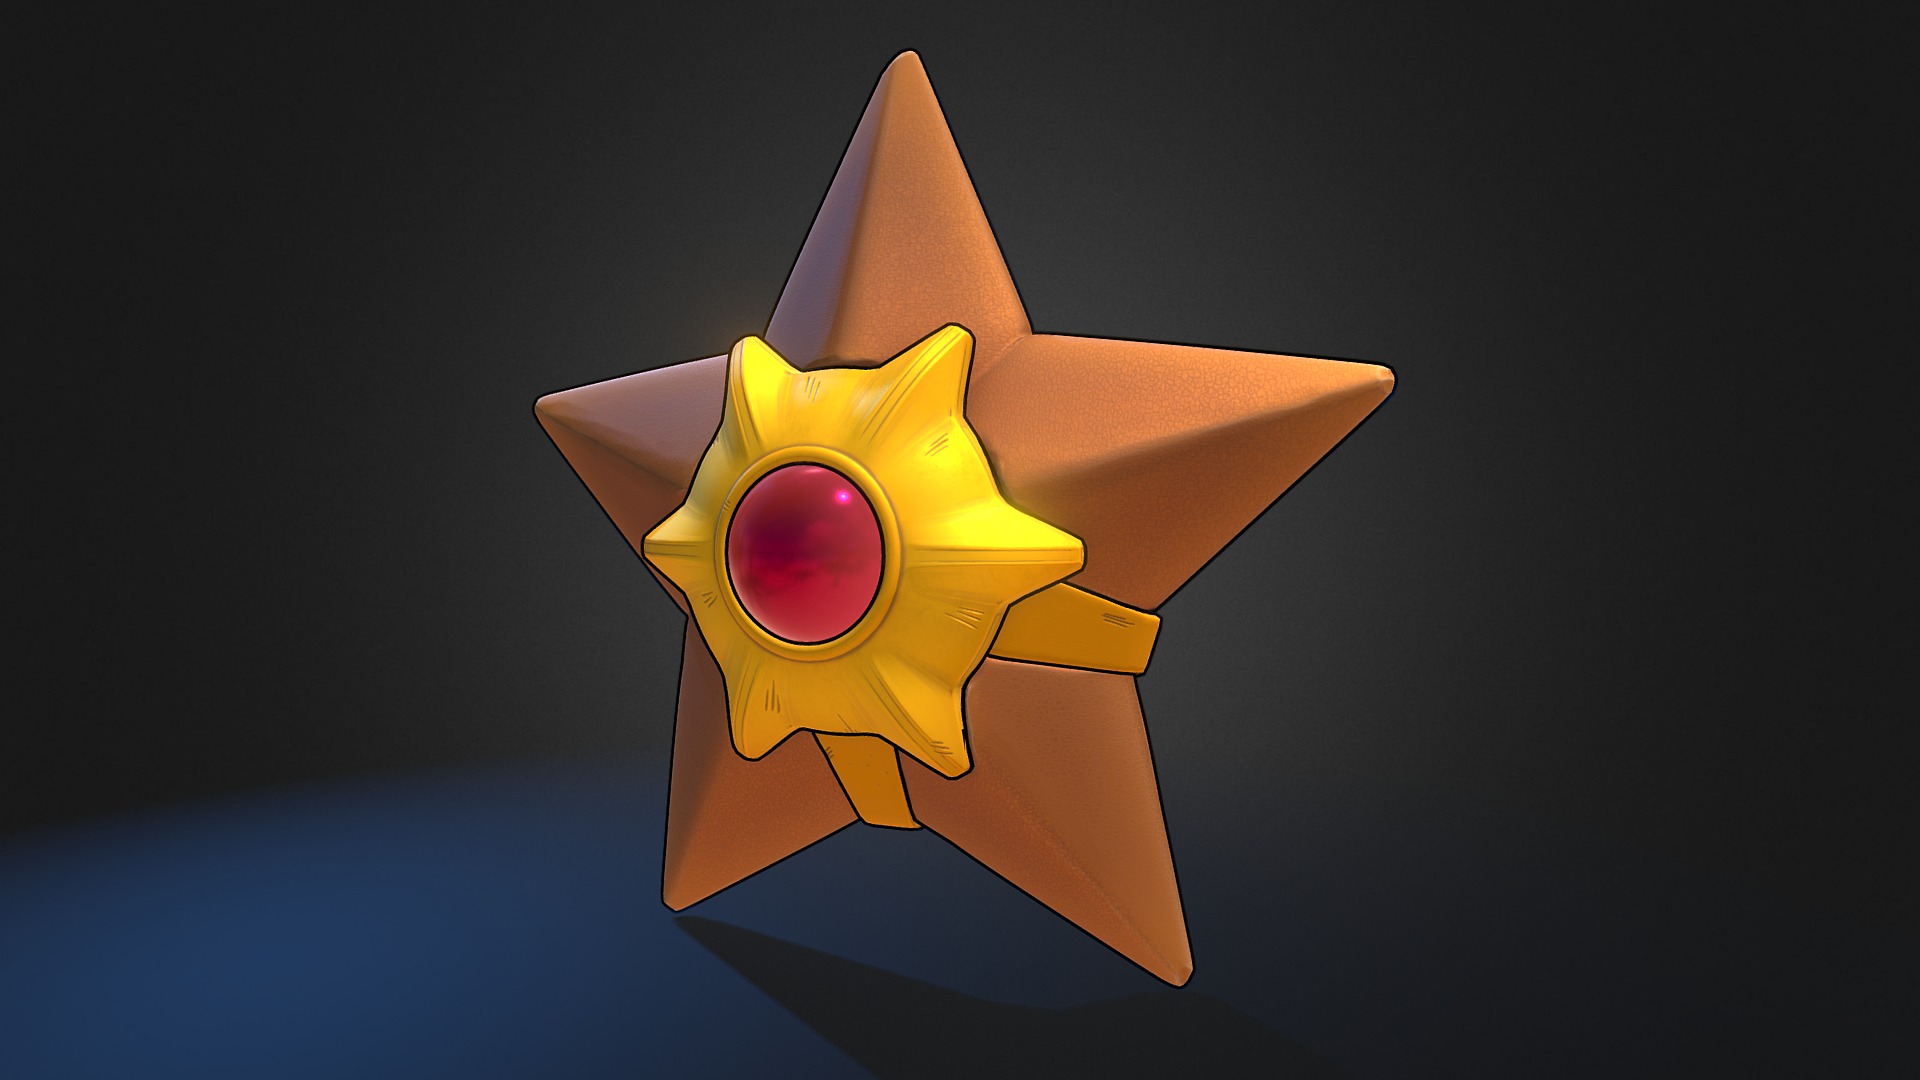 3D model Staryu Pokemon - This is a 3D model of the Staryu Pokemon. The 3D model is about a yellow star with a black background.